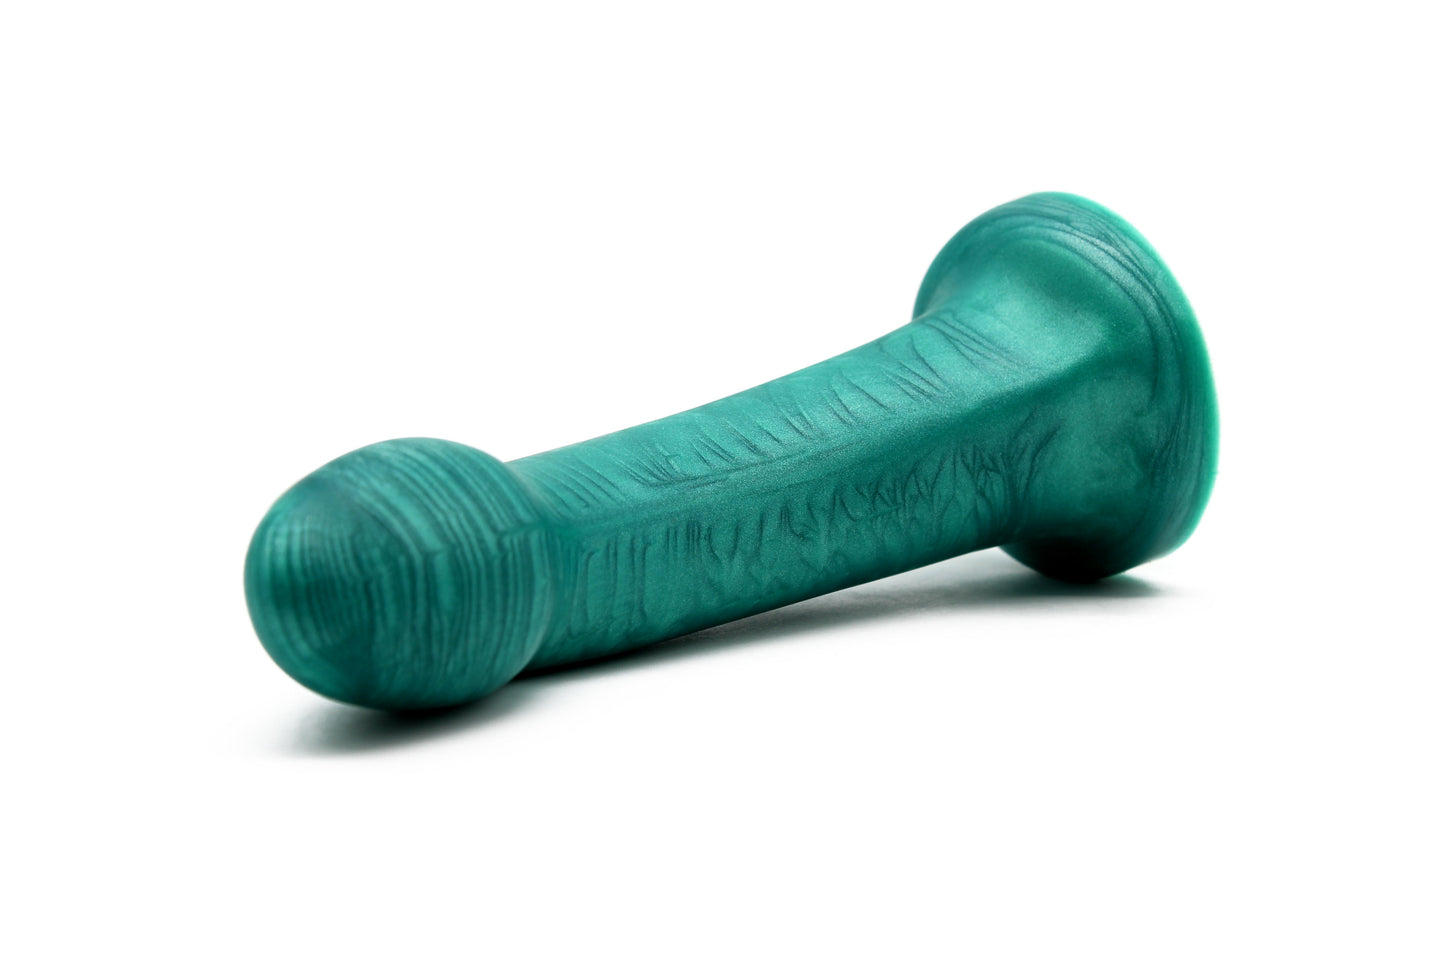 The Astra G-Spot Dildo - Large Size